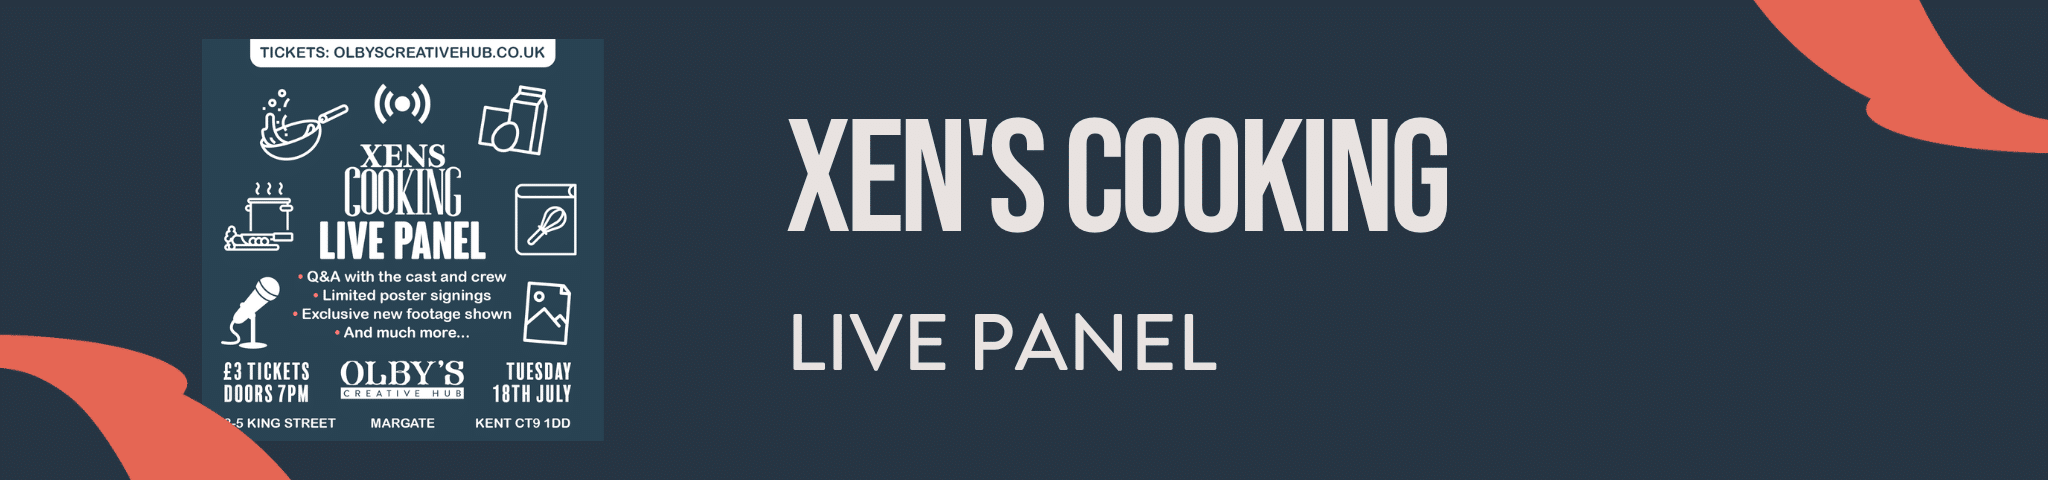 XEN’S COOKING LIVE PANEL – 18TH JULY 2023